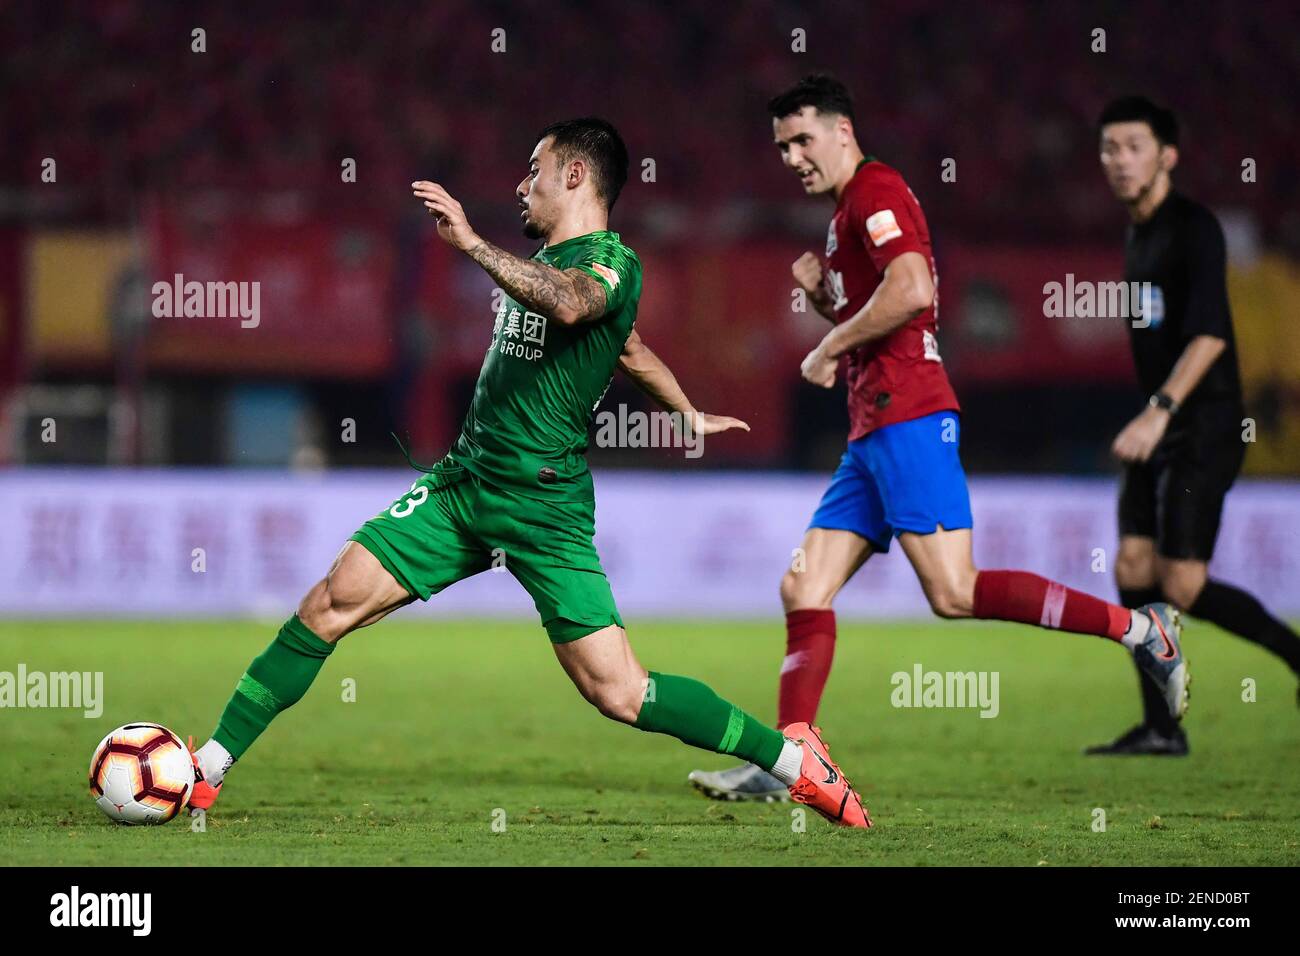 English football player Nico Yennaris, known in China as Li Ke, of Beijing Sinobo Guoan dribbles against Henan Jianye in their 20th round match during the 2019 Chinese Football Association Super League (CSL) in Zhengzhou city, central China's Henan province, 27 July 2019. Henan Jianye defeated Beijing Sinobo Guoan 1-0. (Photo by Stringer - Imaginechina/Sipa USA) Stock Photo